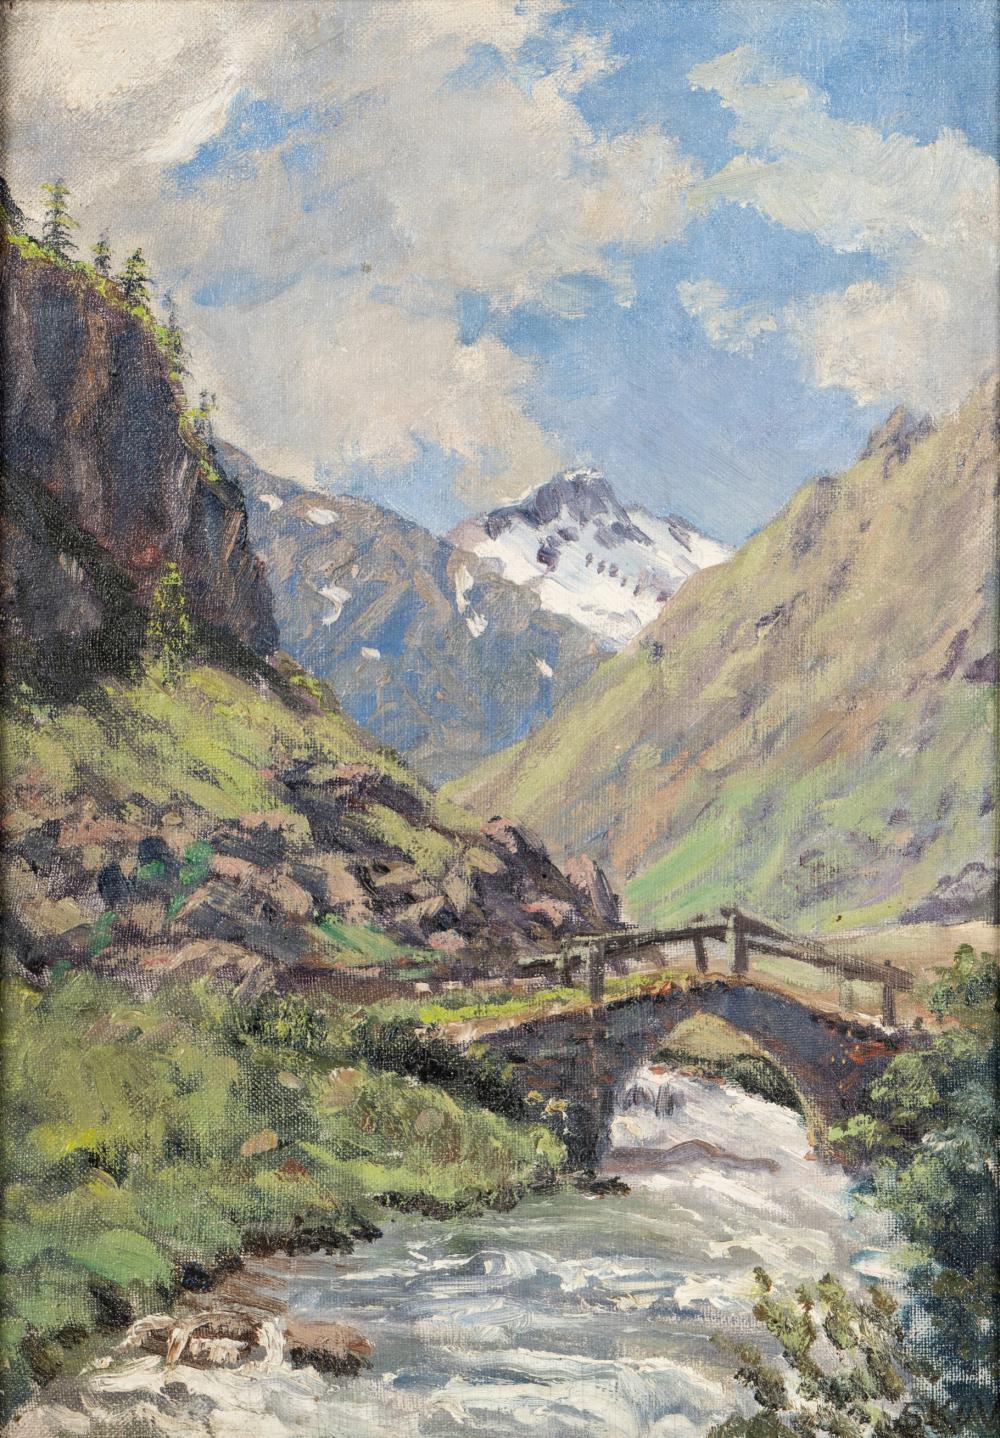 EARLY 20TH CENTURY: MOUNTAIN LANDSCAPE